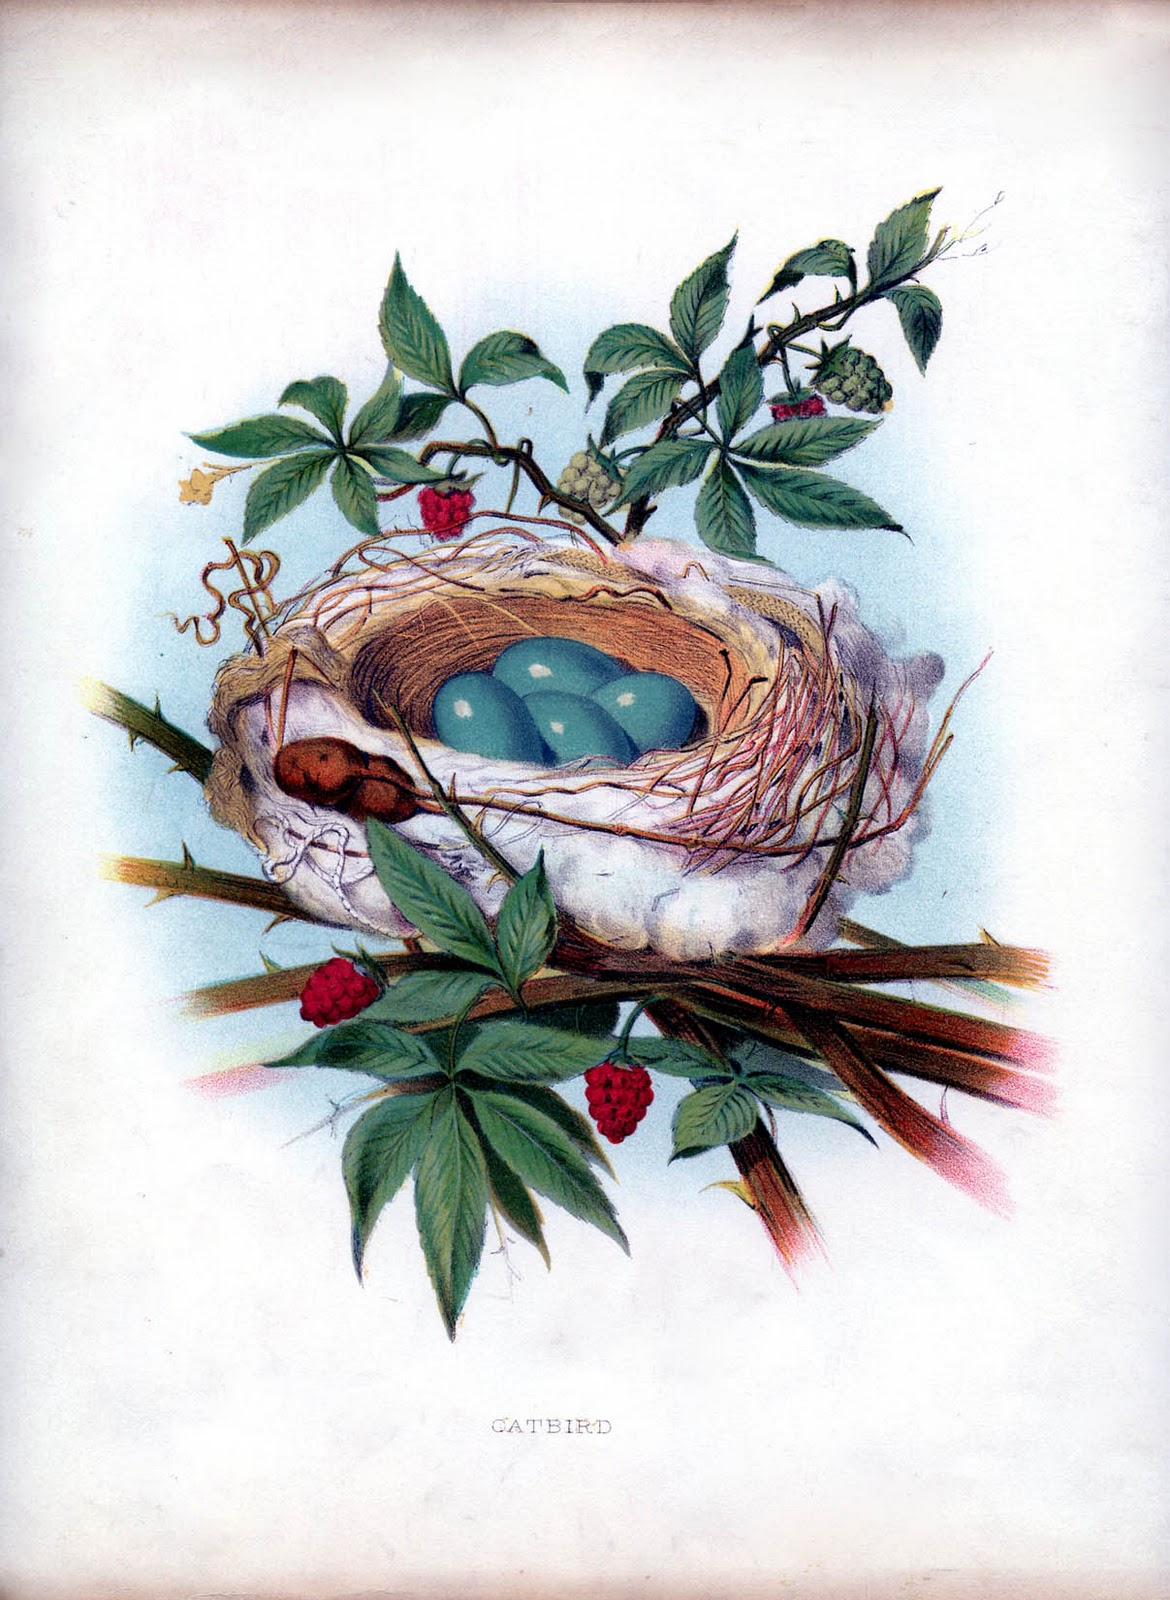 Instant Art Printable - Gorgeous Nest with Blue Eggs - The Graphics Fairy1170 x 1600